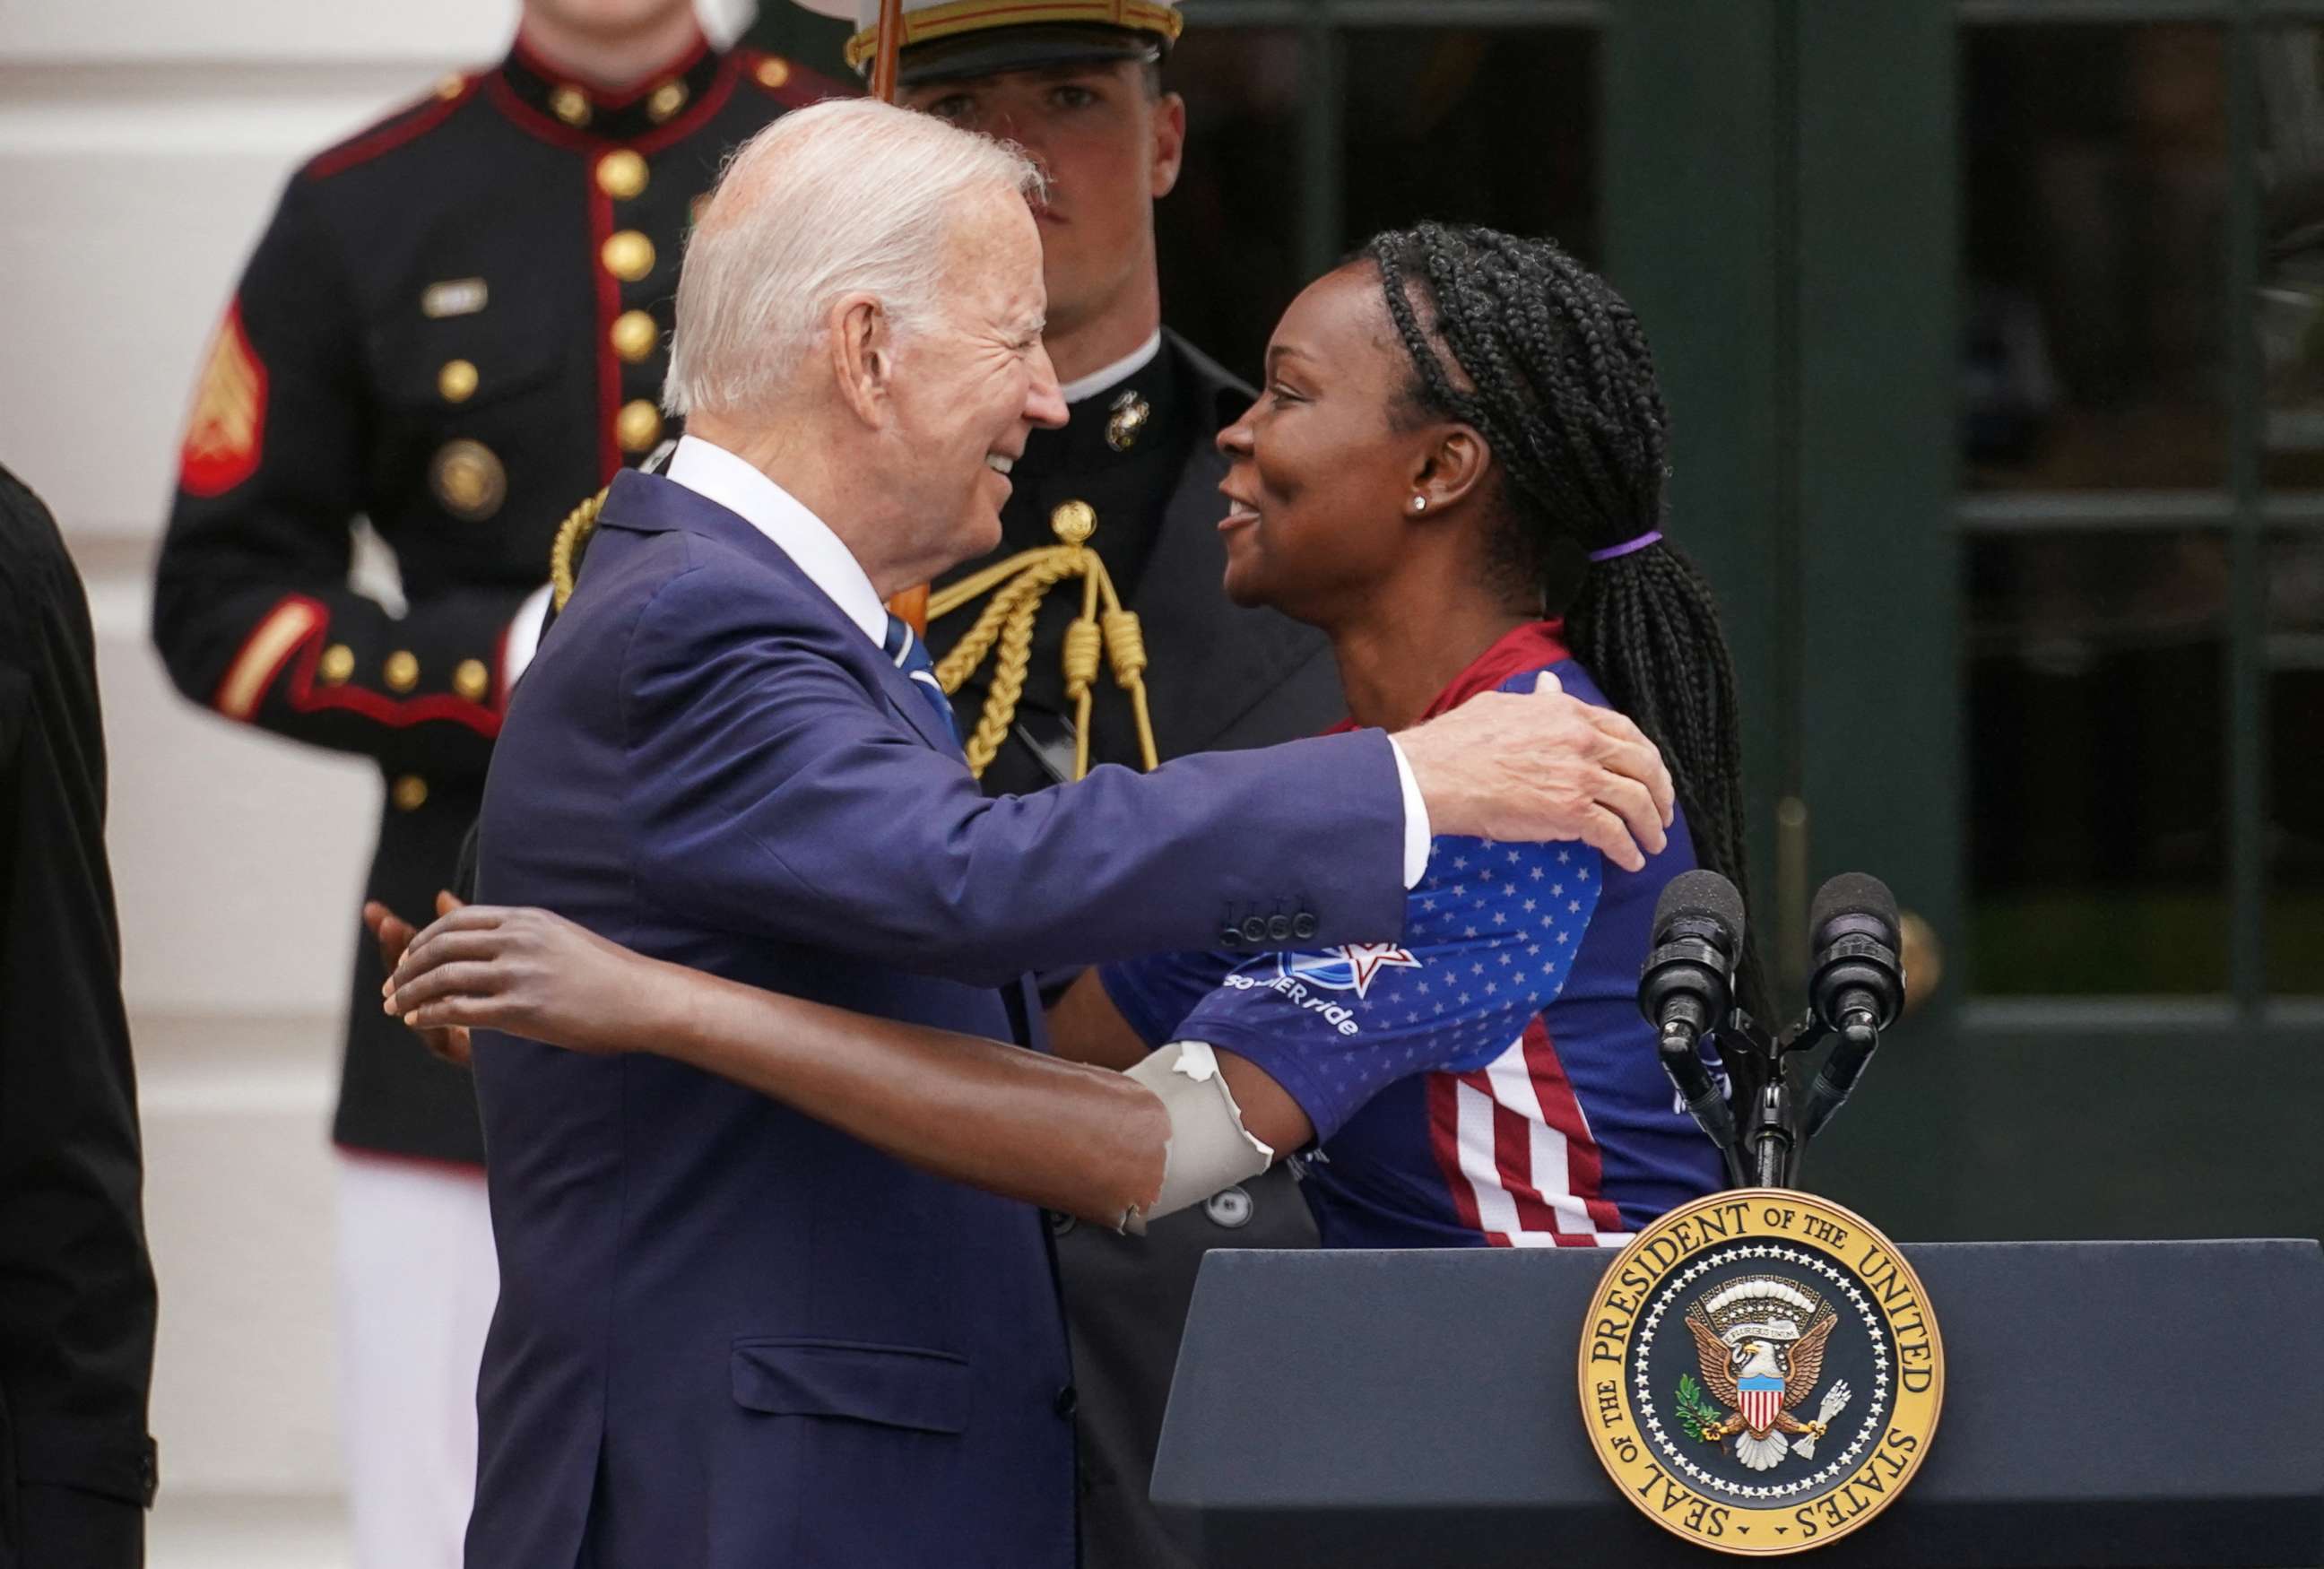 PHOTO: President Joe Biden hugs Danielle Green, a soldier who lost her arm while serving in Iraq, during an event welcoming participants in the Wounded Warrior Project Soldier Ride, at the White House in Washington, June 23, 2022.